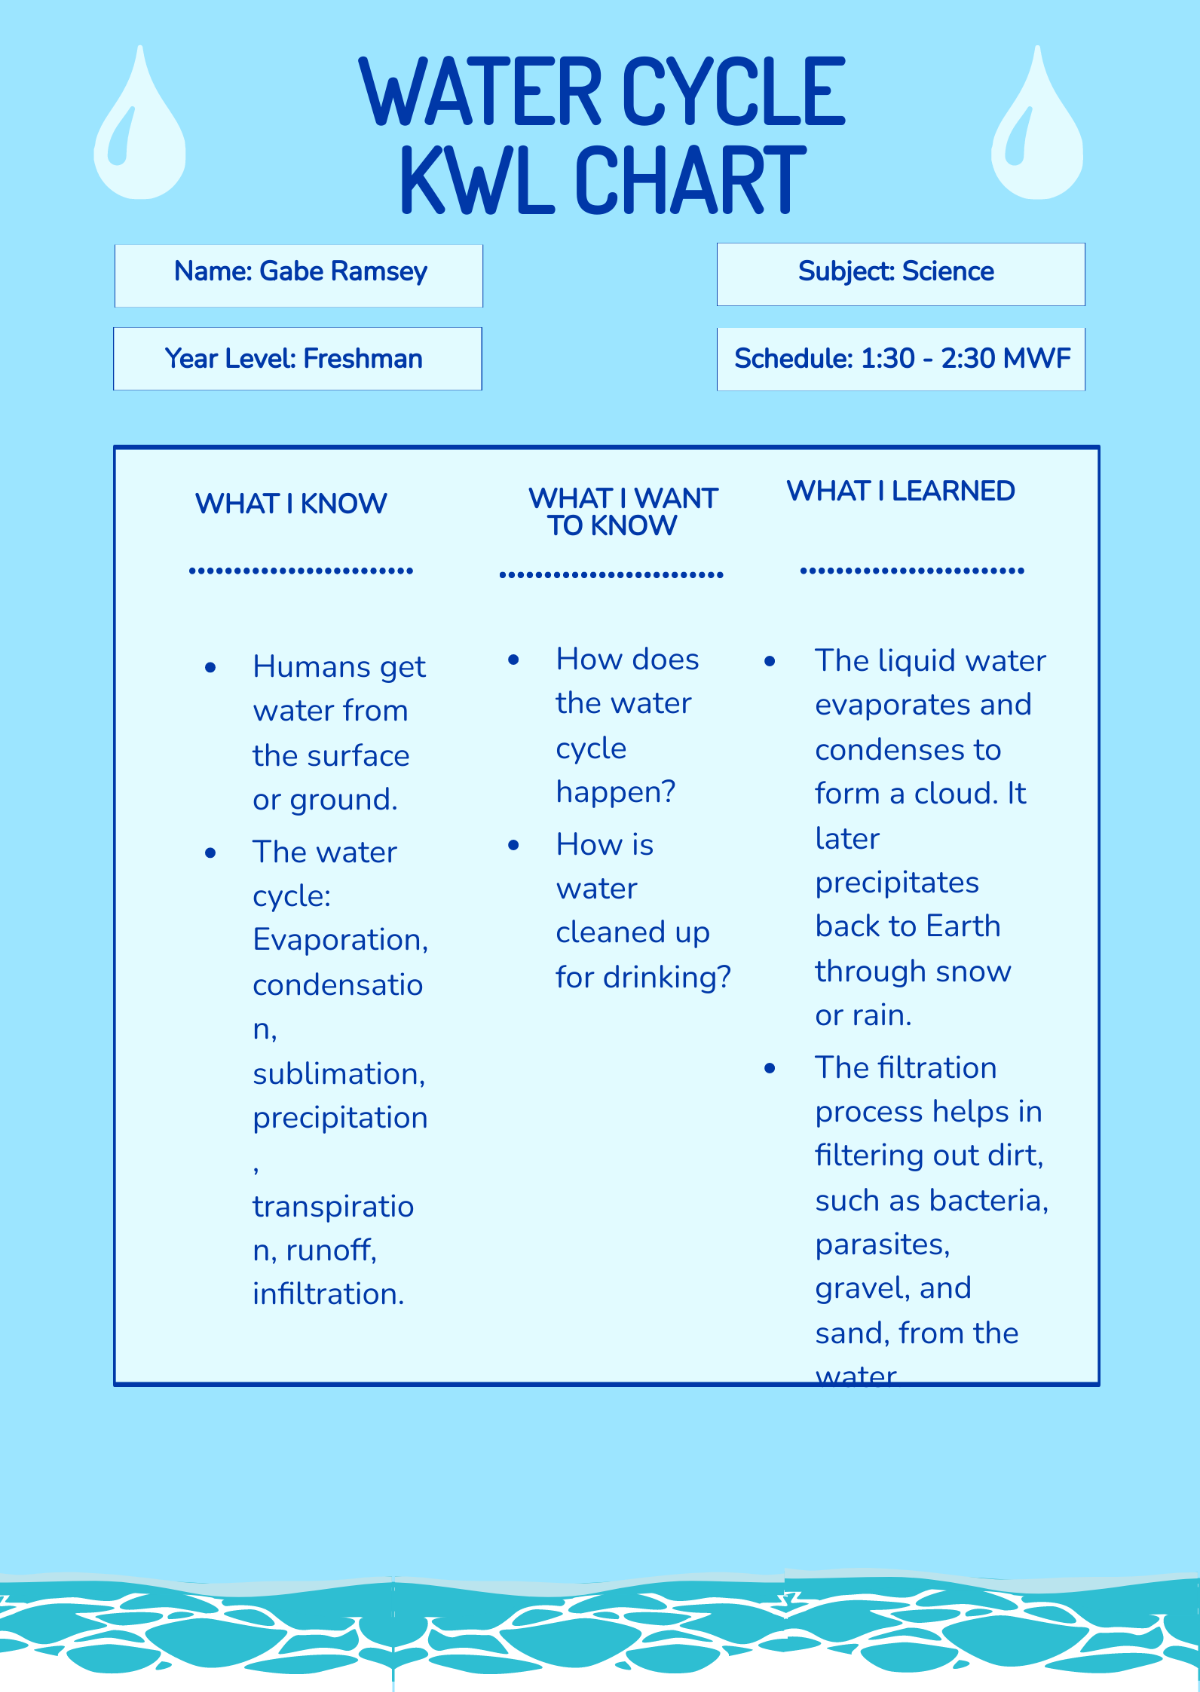 Water Cycle KWL Chart Template